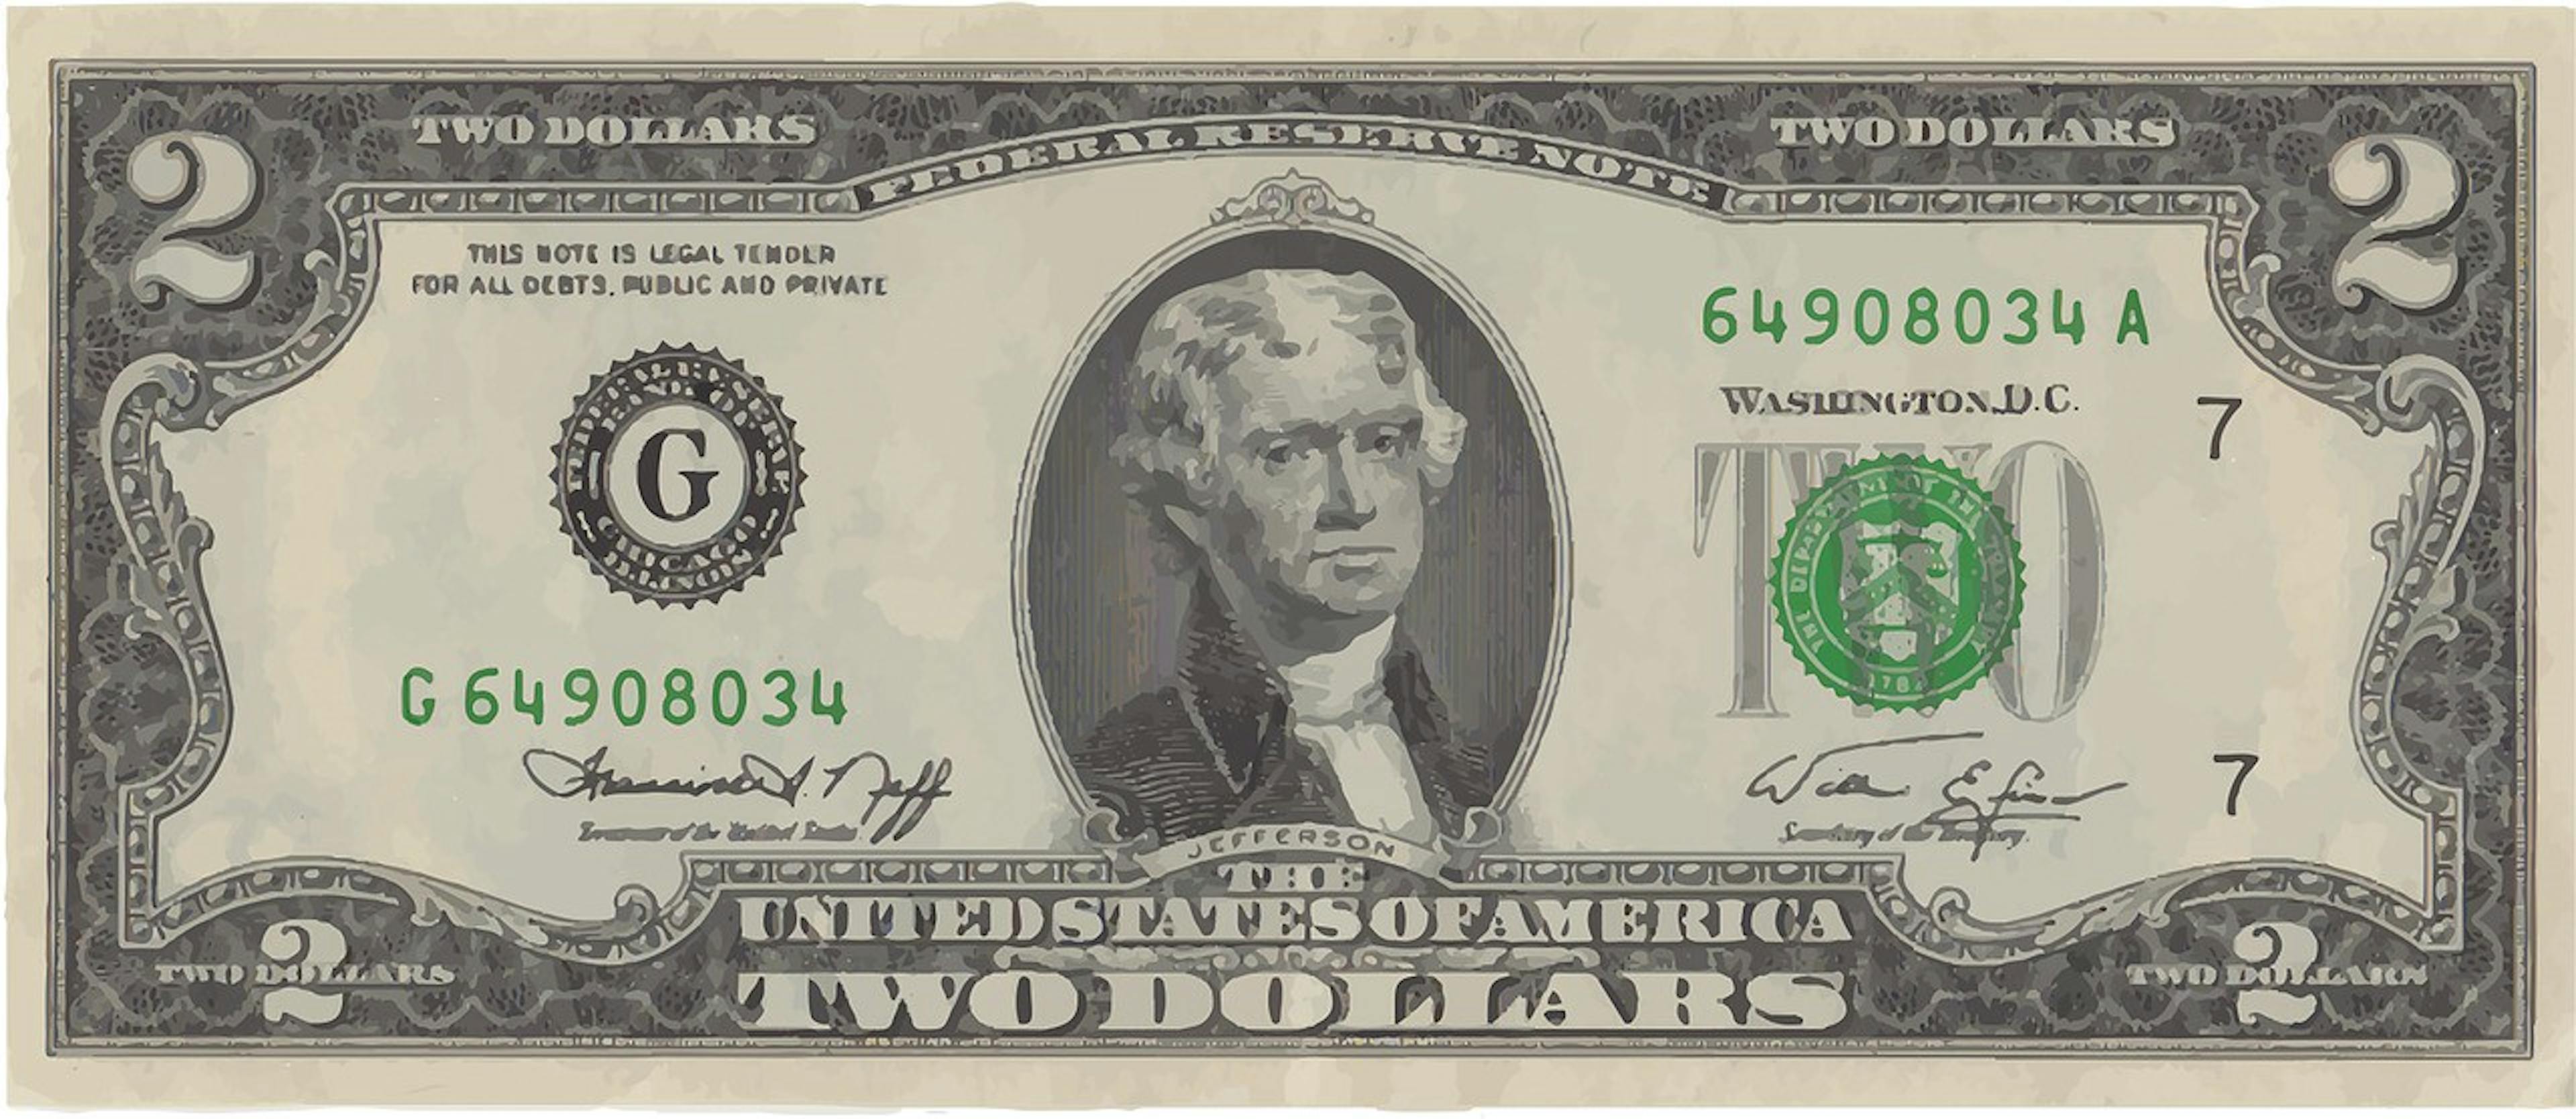 featured image - Get Yourself 1,000 $2 Bills and 100 Waiters Pads